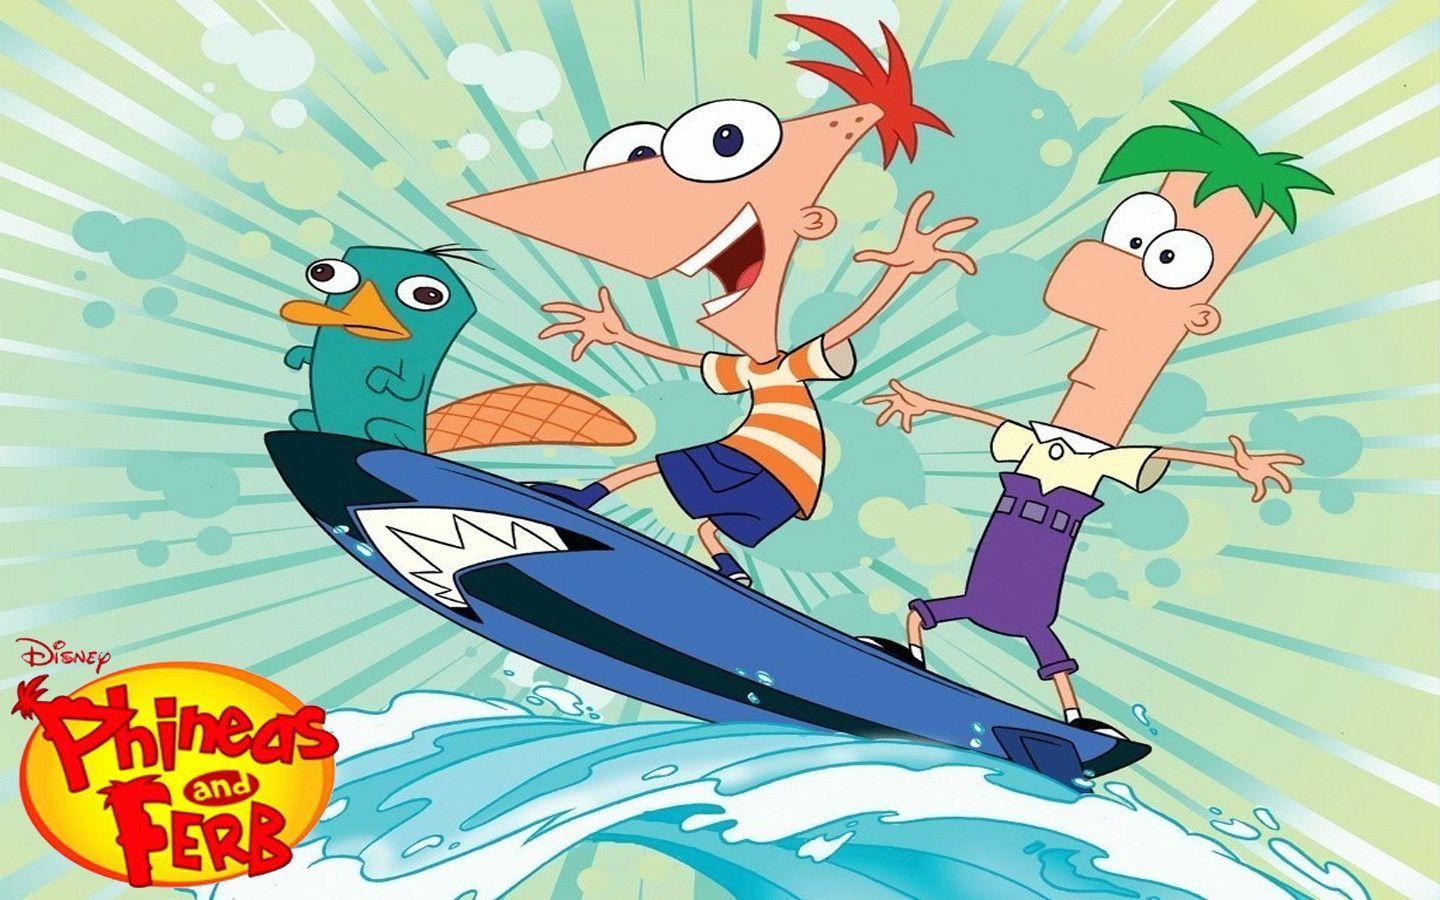 Wala Lang Phineas and Ferb Wallpaper For Android. wolcartoon